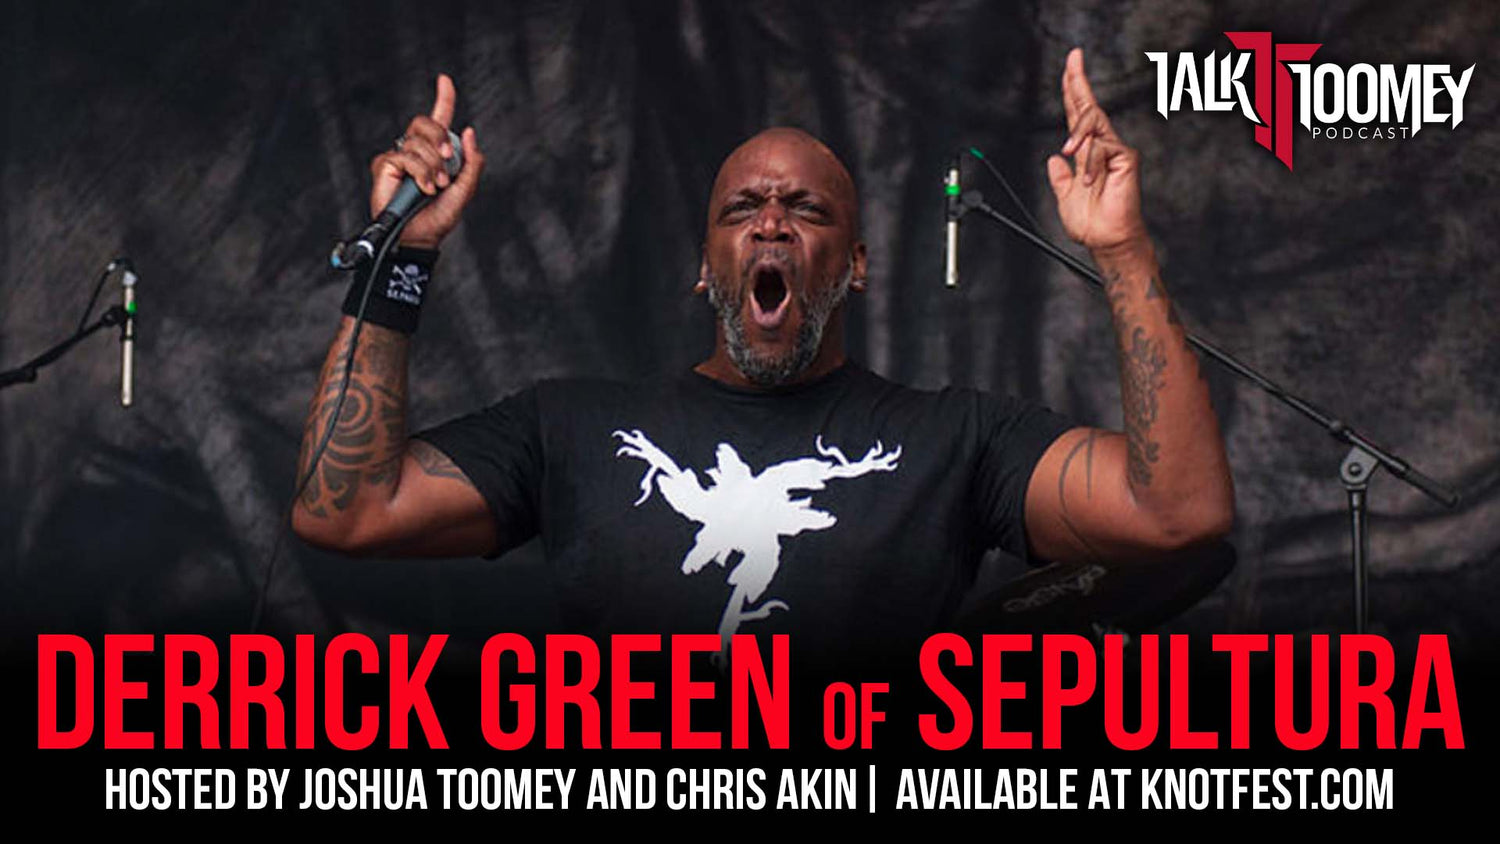 Derrick Green of Sepultura talks SepulQuarta, tour must-haves and more on the latest Talk Toomey podcast